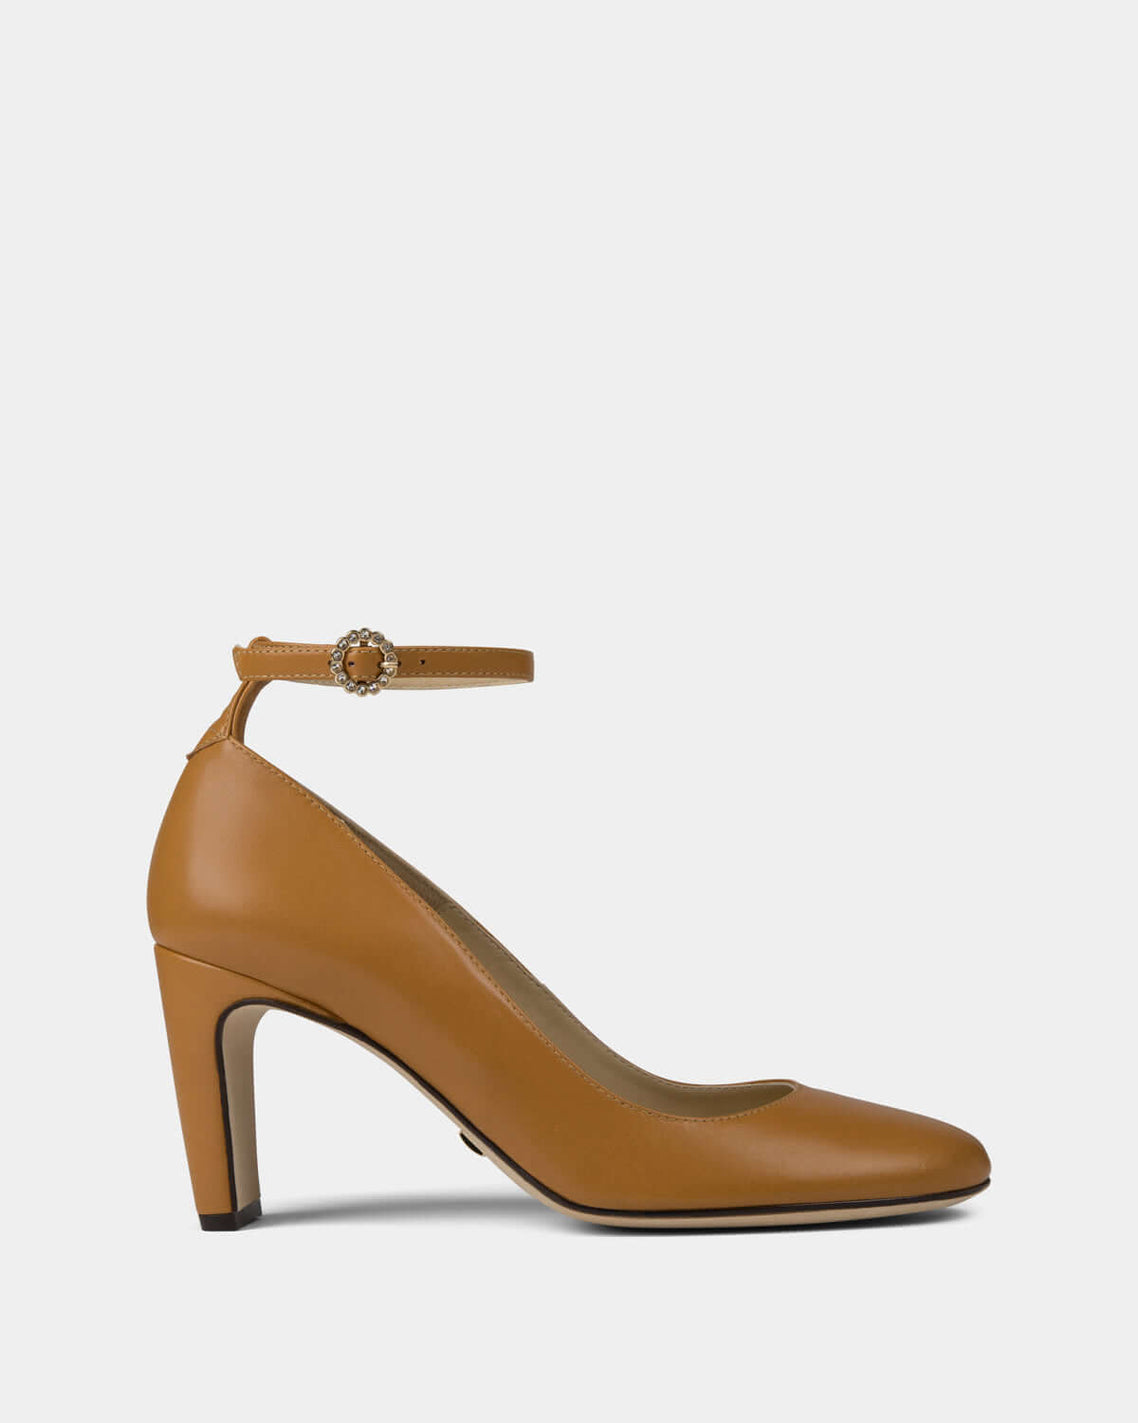 kallu-kallú-light-brown-mustard-nappa-leather-shoes-for-women-made-in-spain-heels-shoes-high-heels-pums